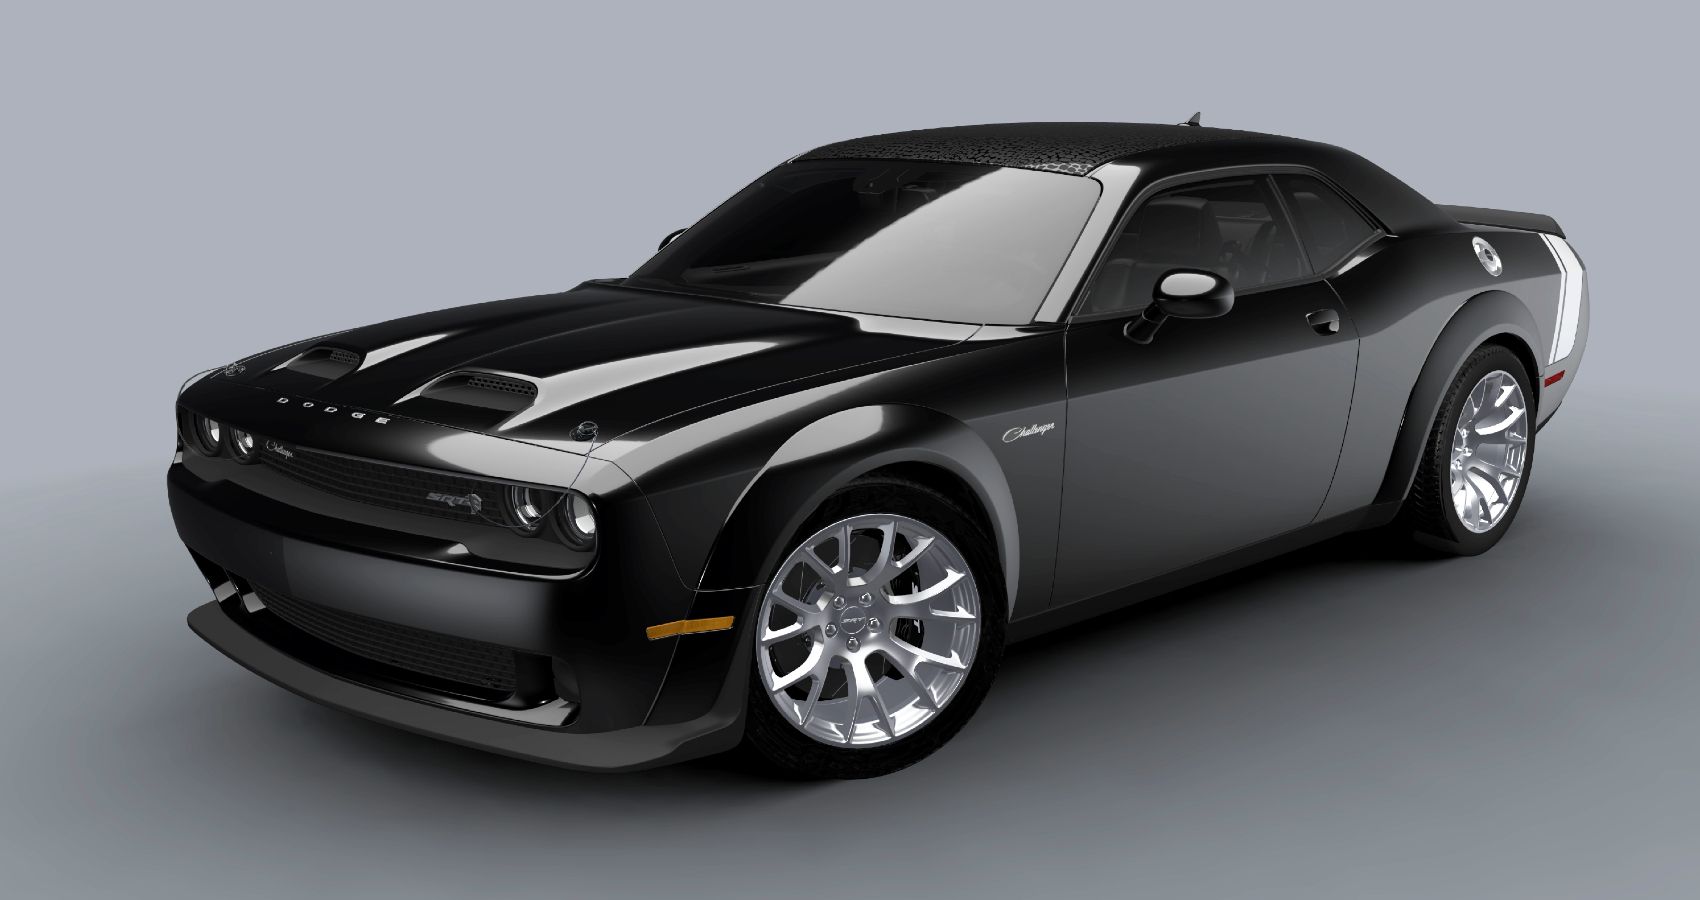 2023 Dodge Challenger Black Ghost Is A Love Letter To A 70’s Detroit Legend